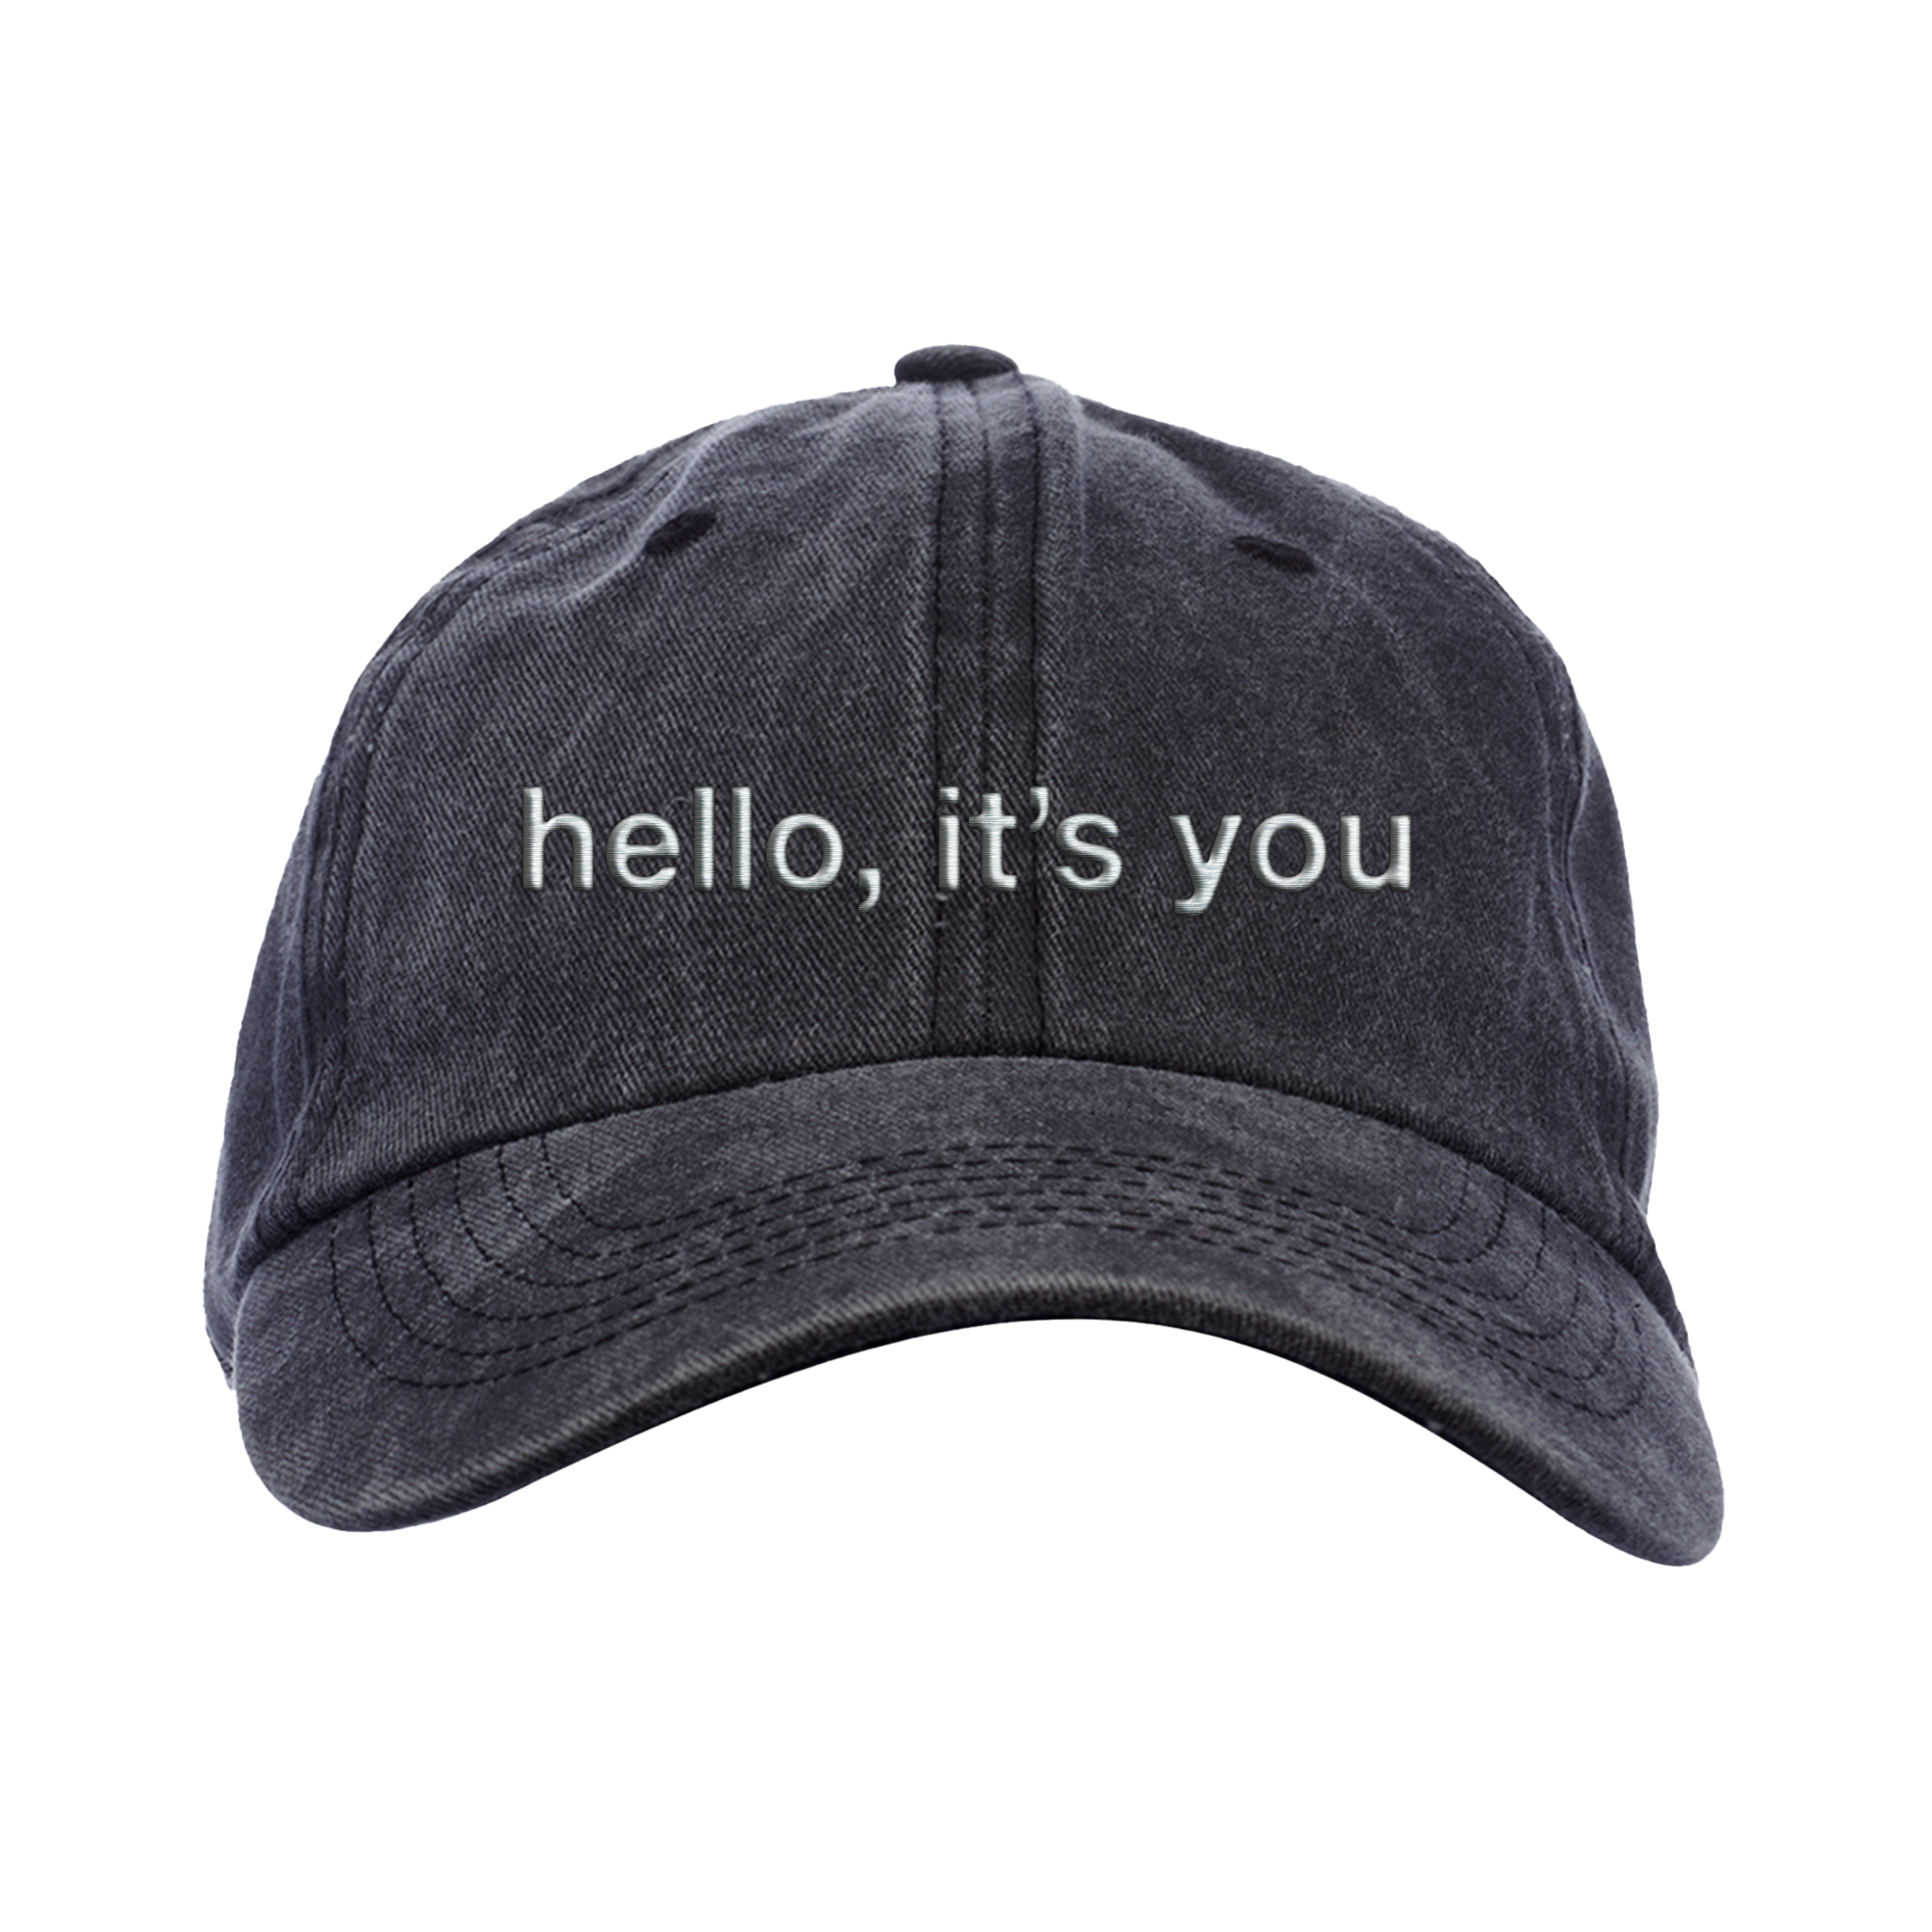 Bearings - hello, it's you Dad Hat